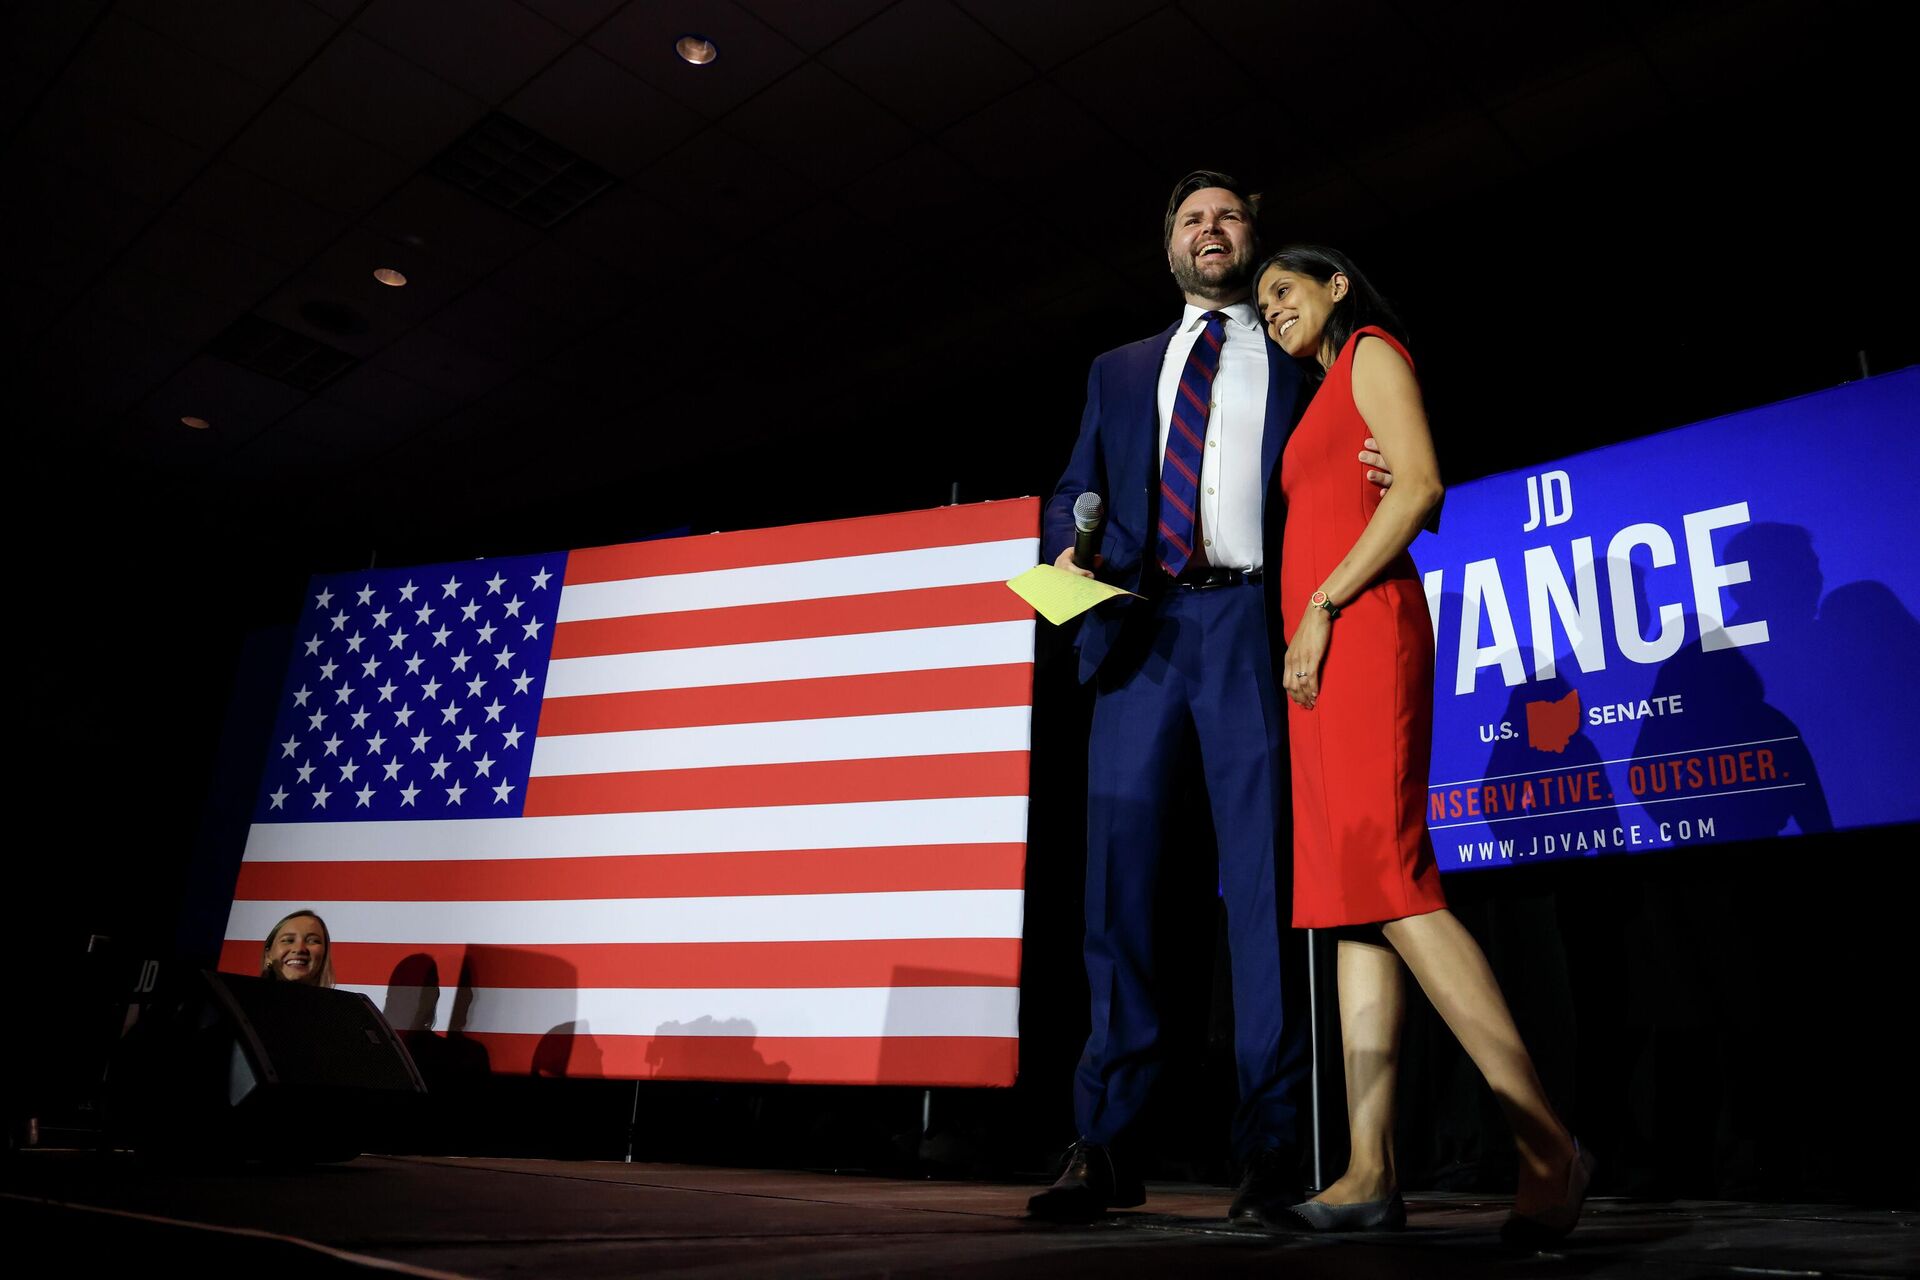 Republican Senate candidate JD Vance, left, is hugs his wife Usha Vance, as he prepares to speak to supporters during an election night watch party, Tuesday, May 3, 2022, in Cincinnati. - Sputnik International, 1920, 04.05.2022